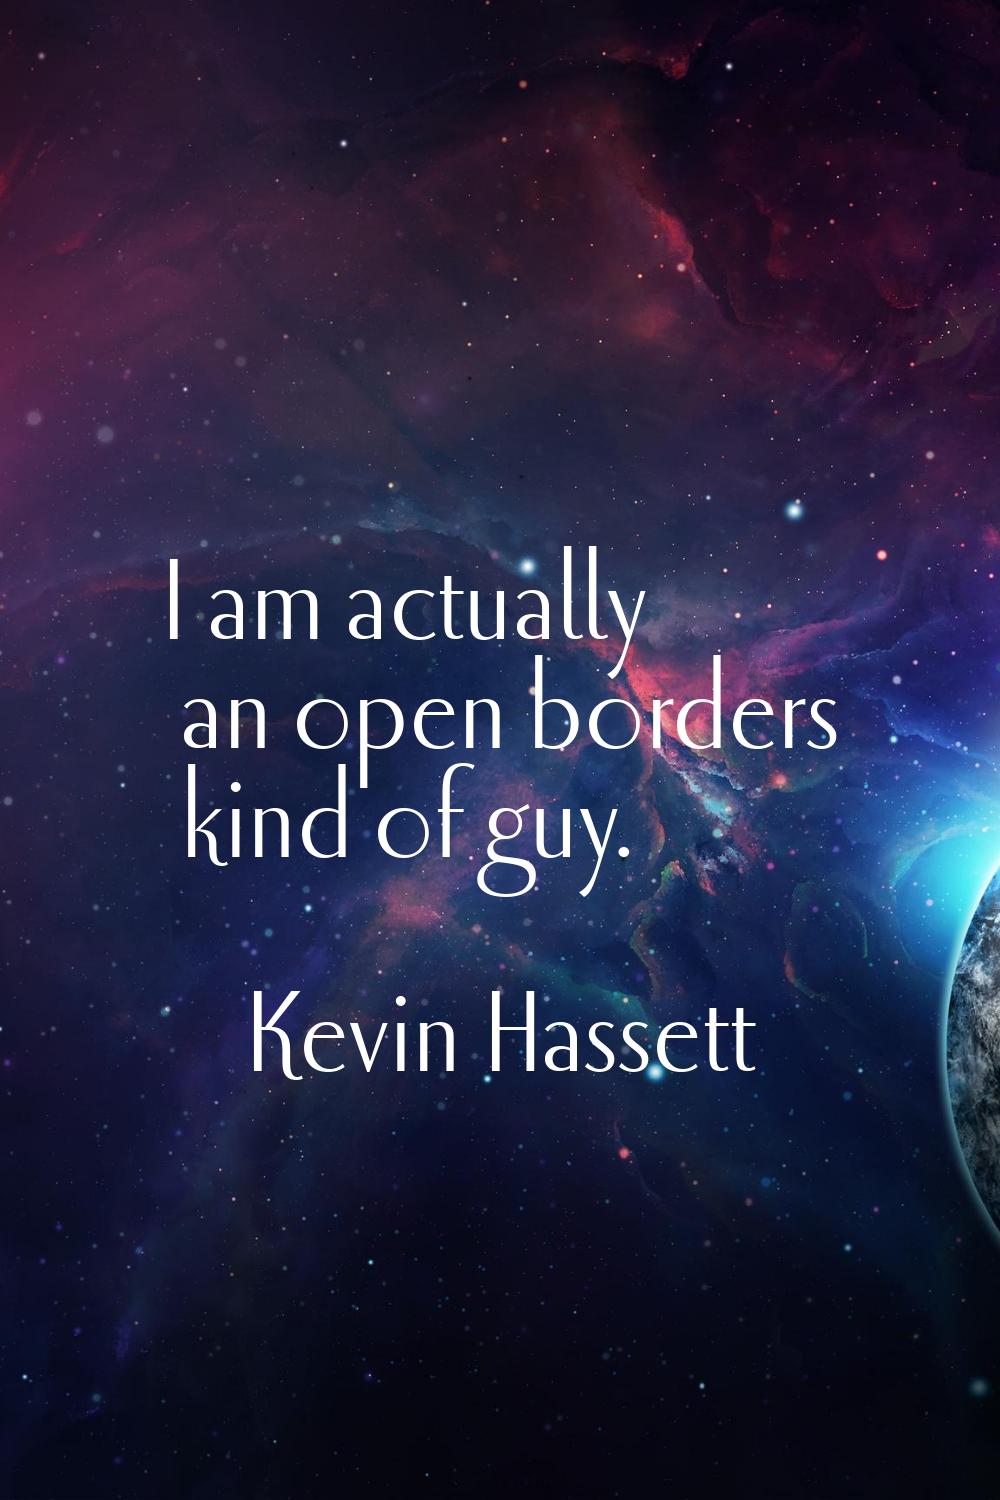 I am actually an open borders kind of guy.